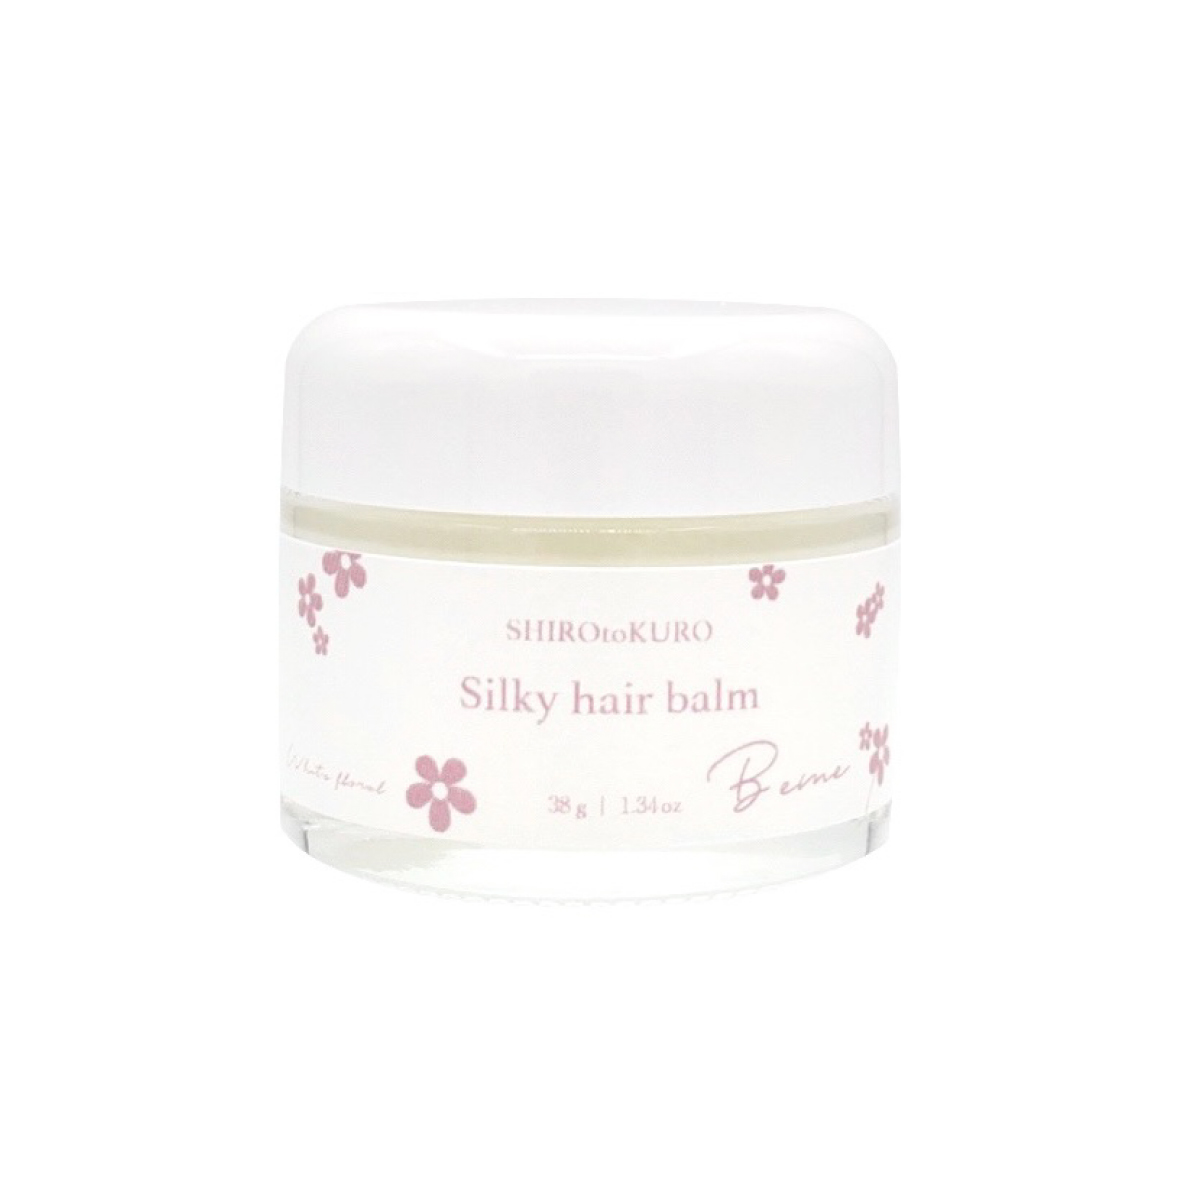 Beme silky hair balm Hair styling and care product 38g